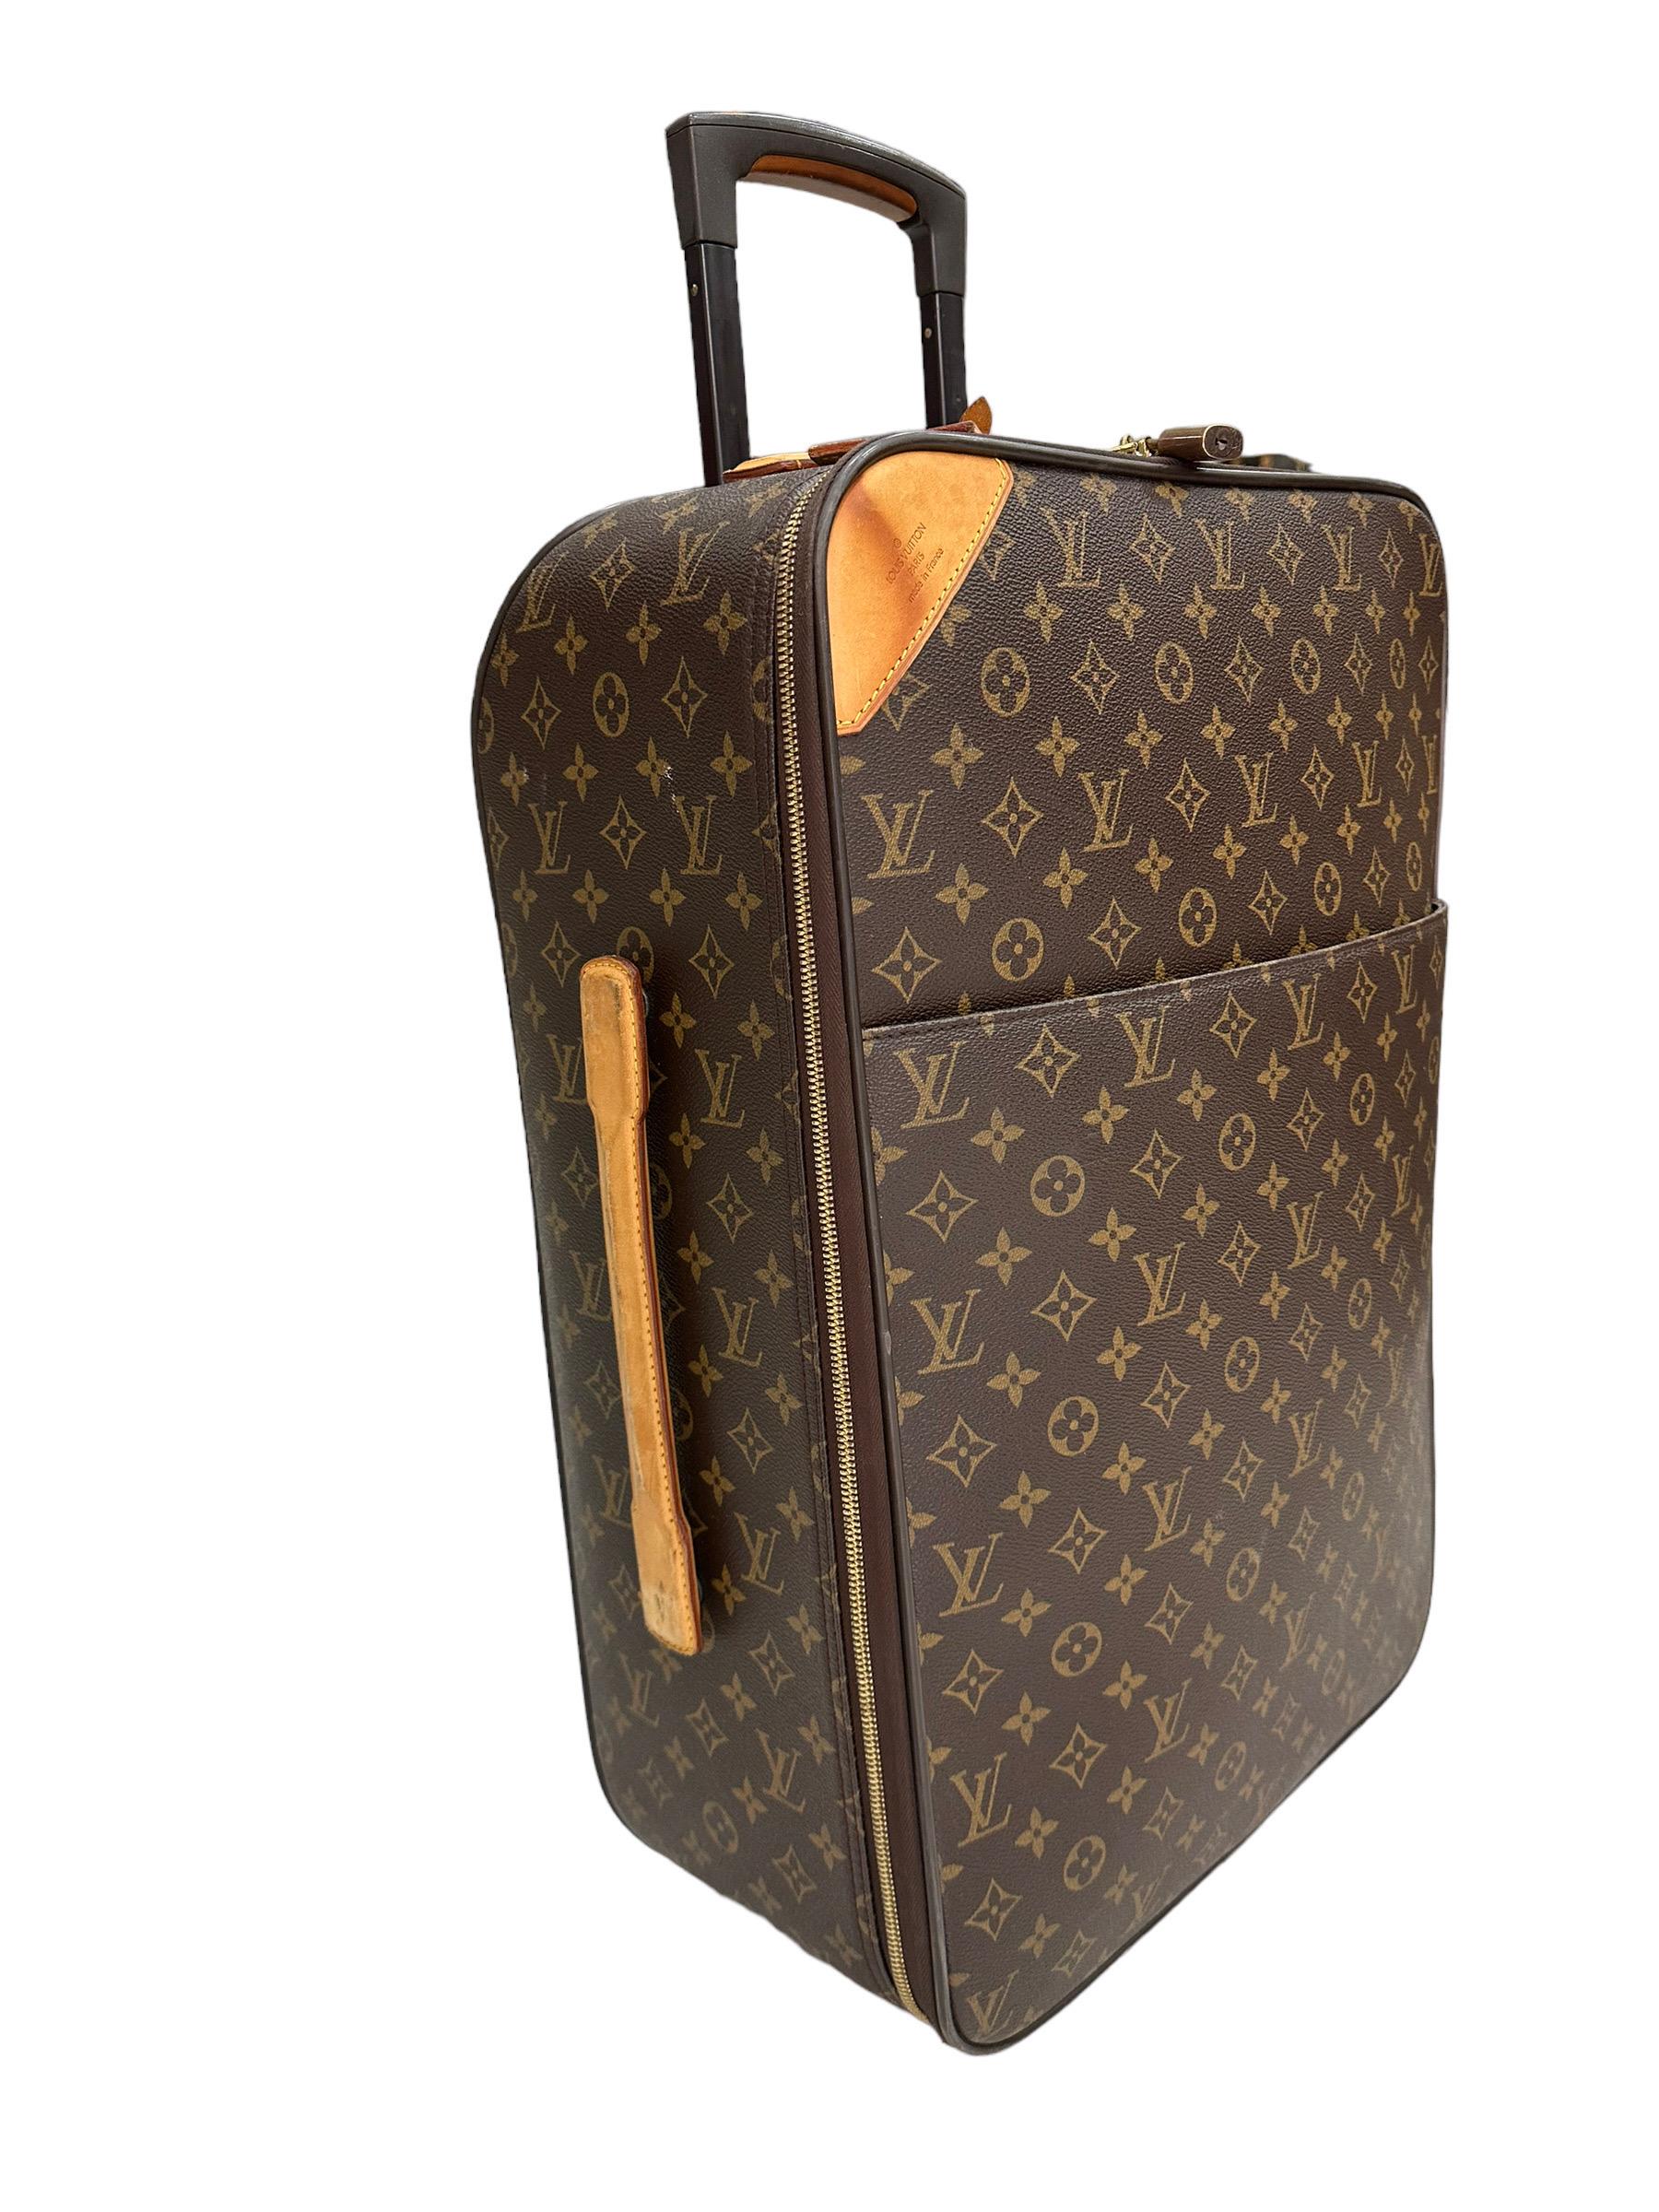 Louis Vuitton Canvas TSA Approved Travel Luggage for sale